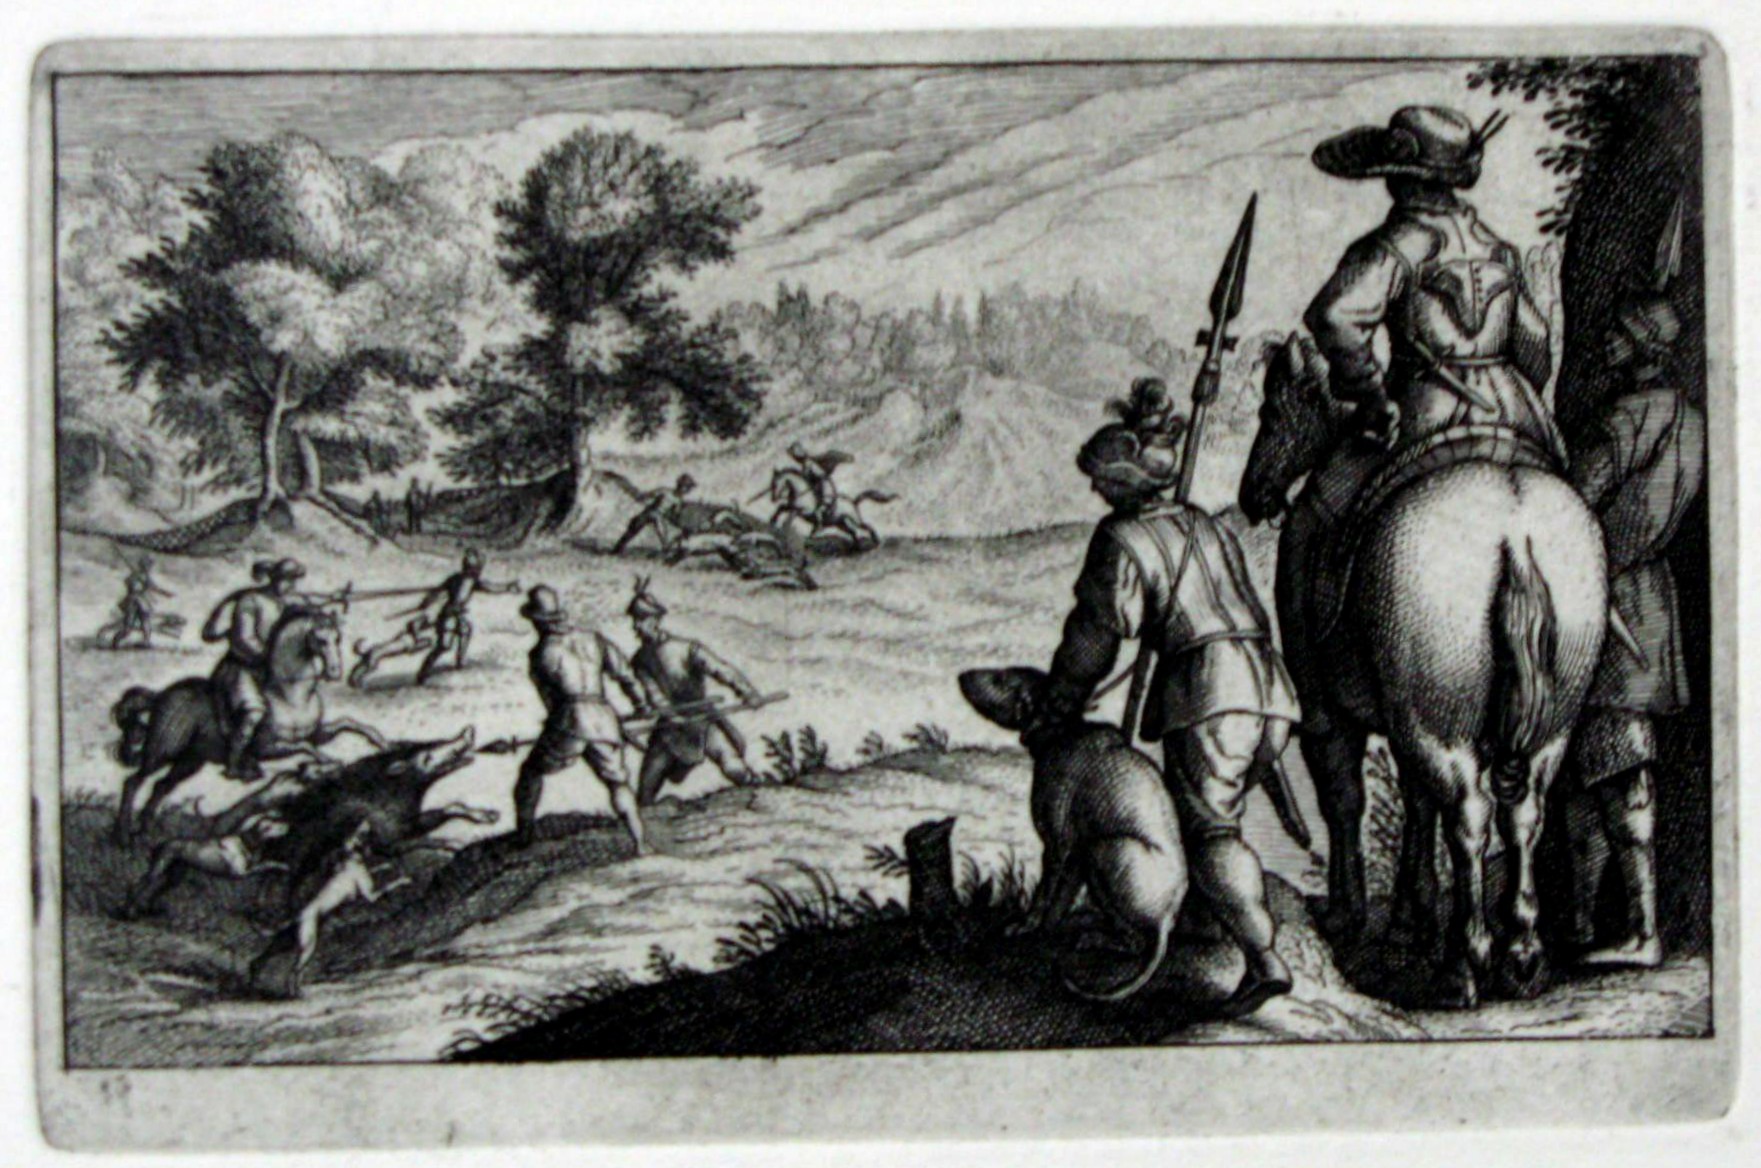 16th and 17th Century Flemish engravings (plates cleaned and printed by artist), Hoydonckx